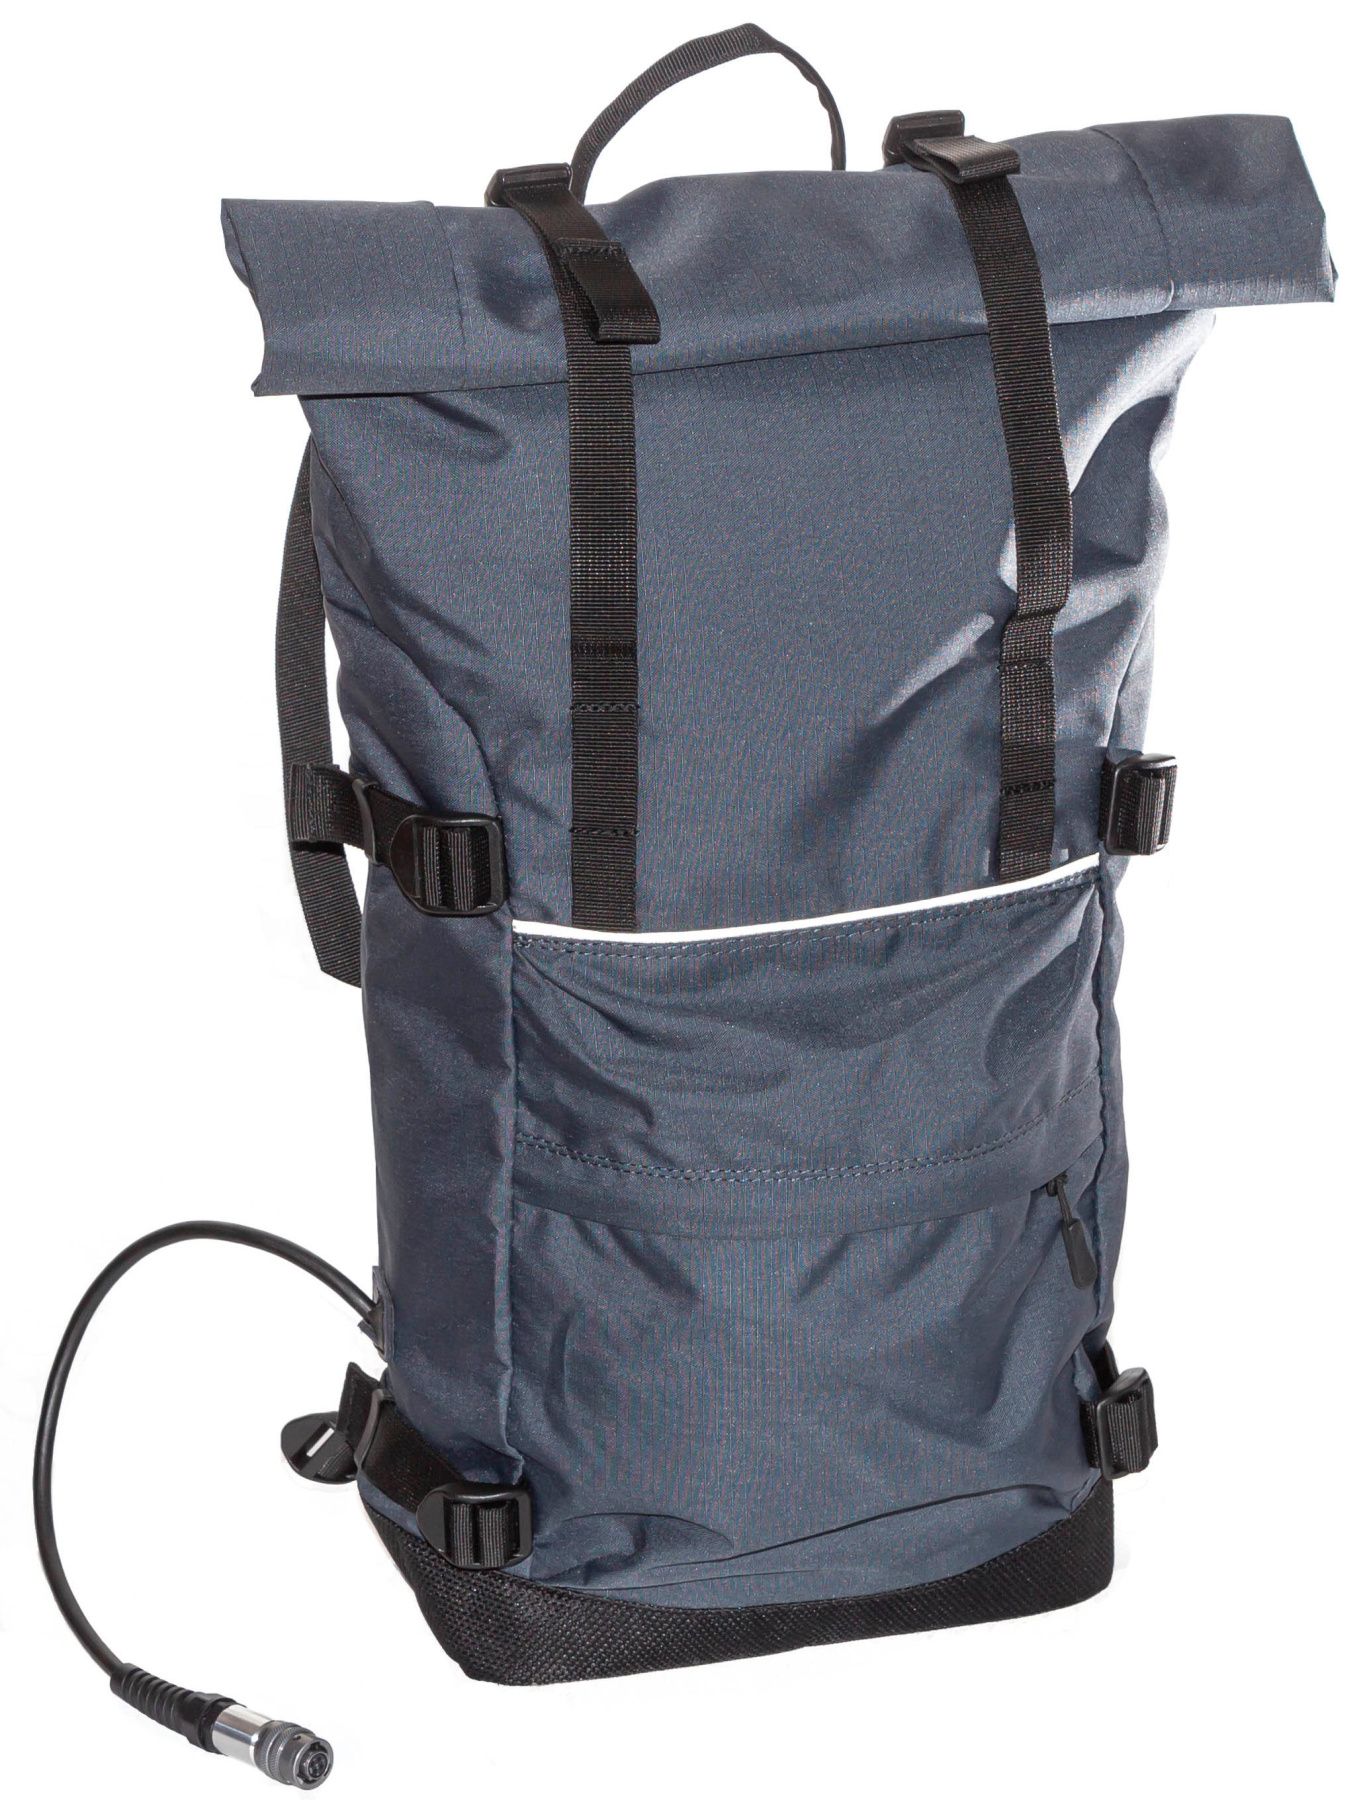 MaxiMag backpack with additional battery